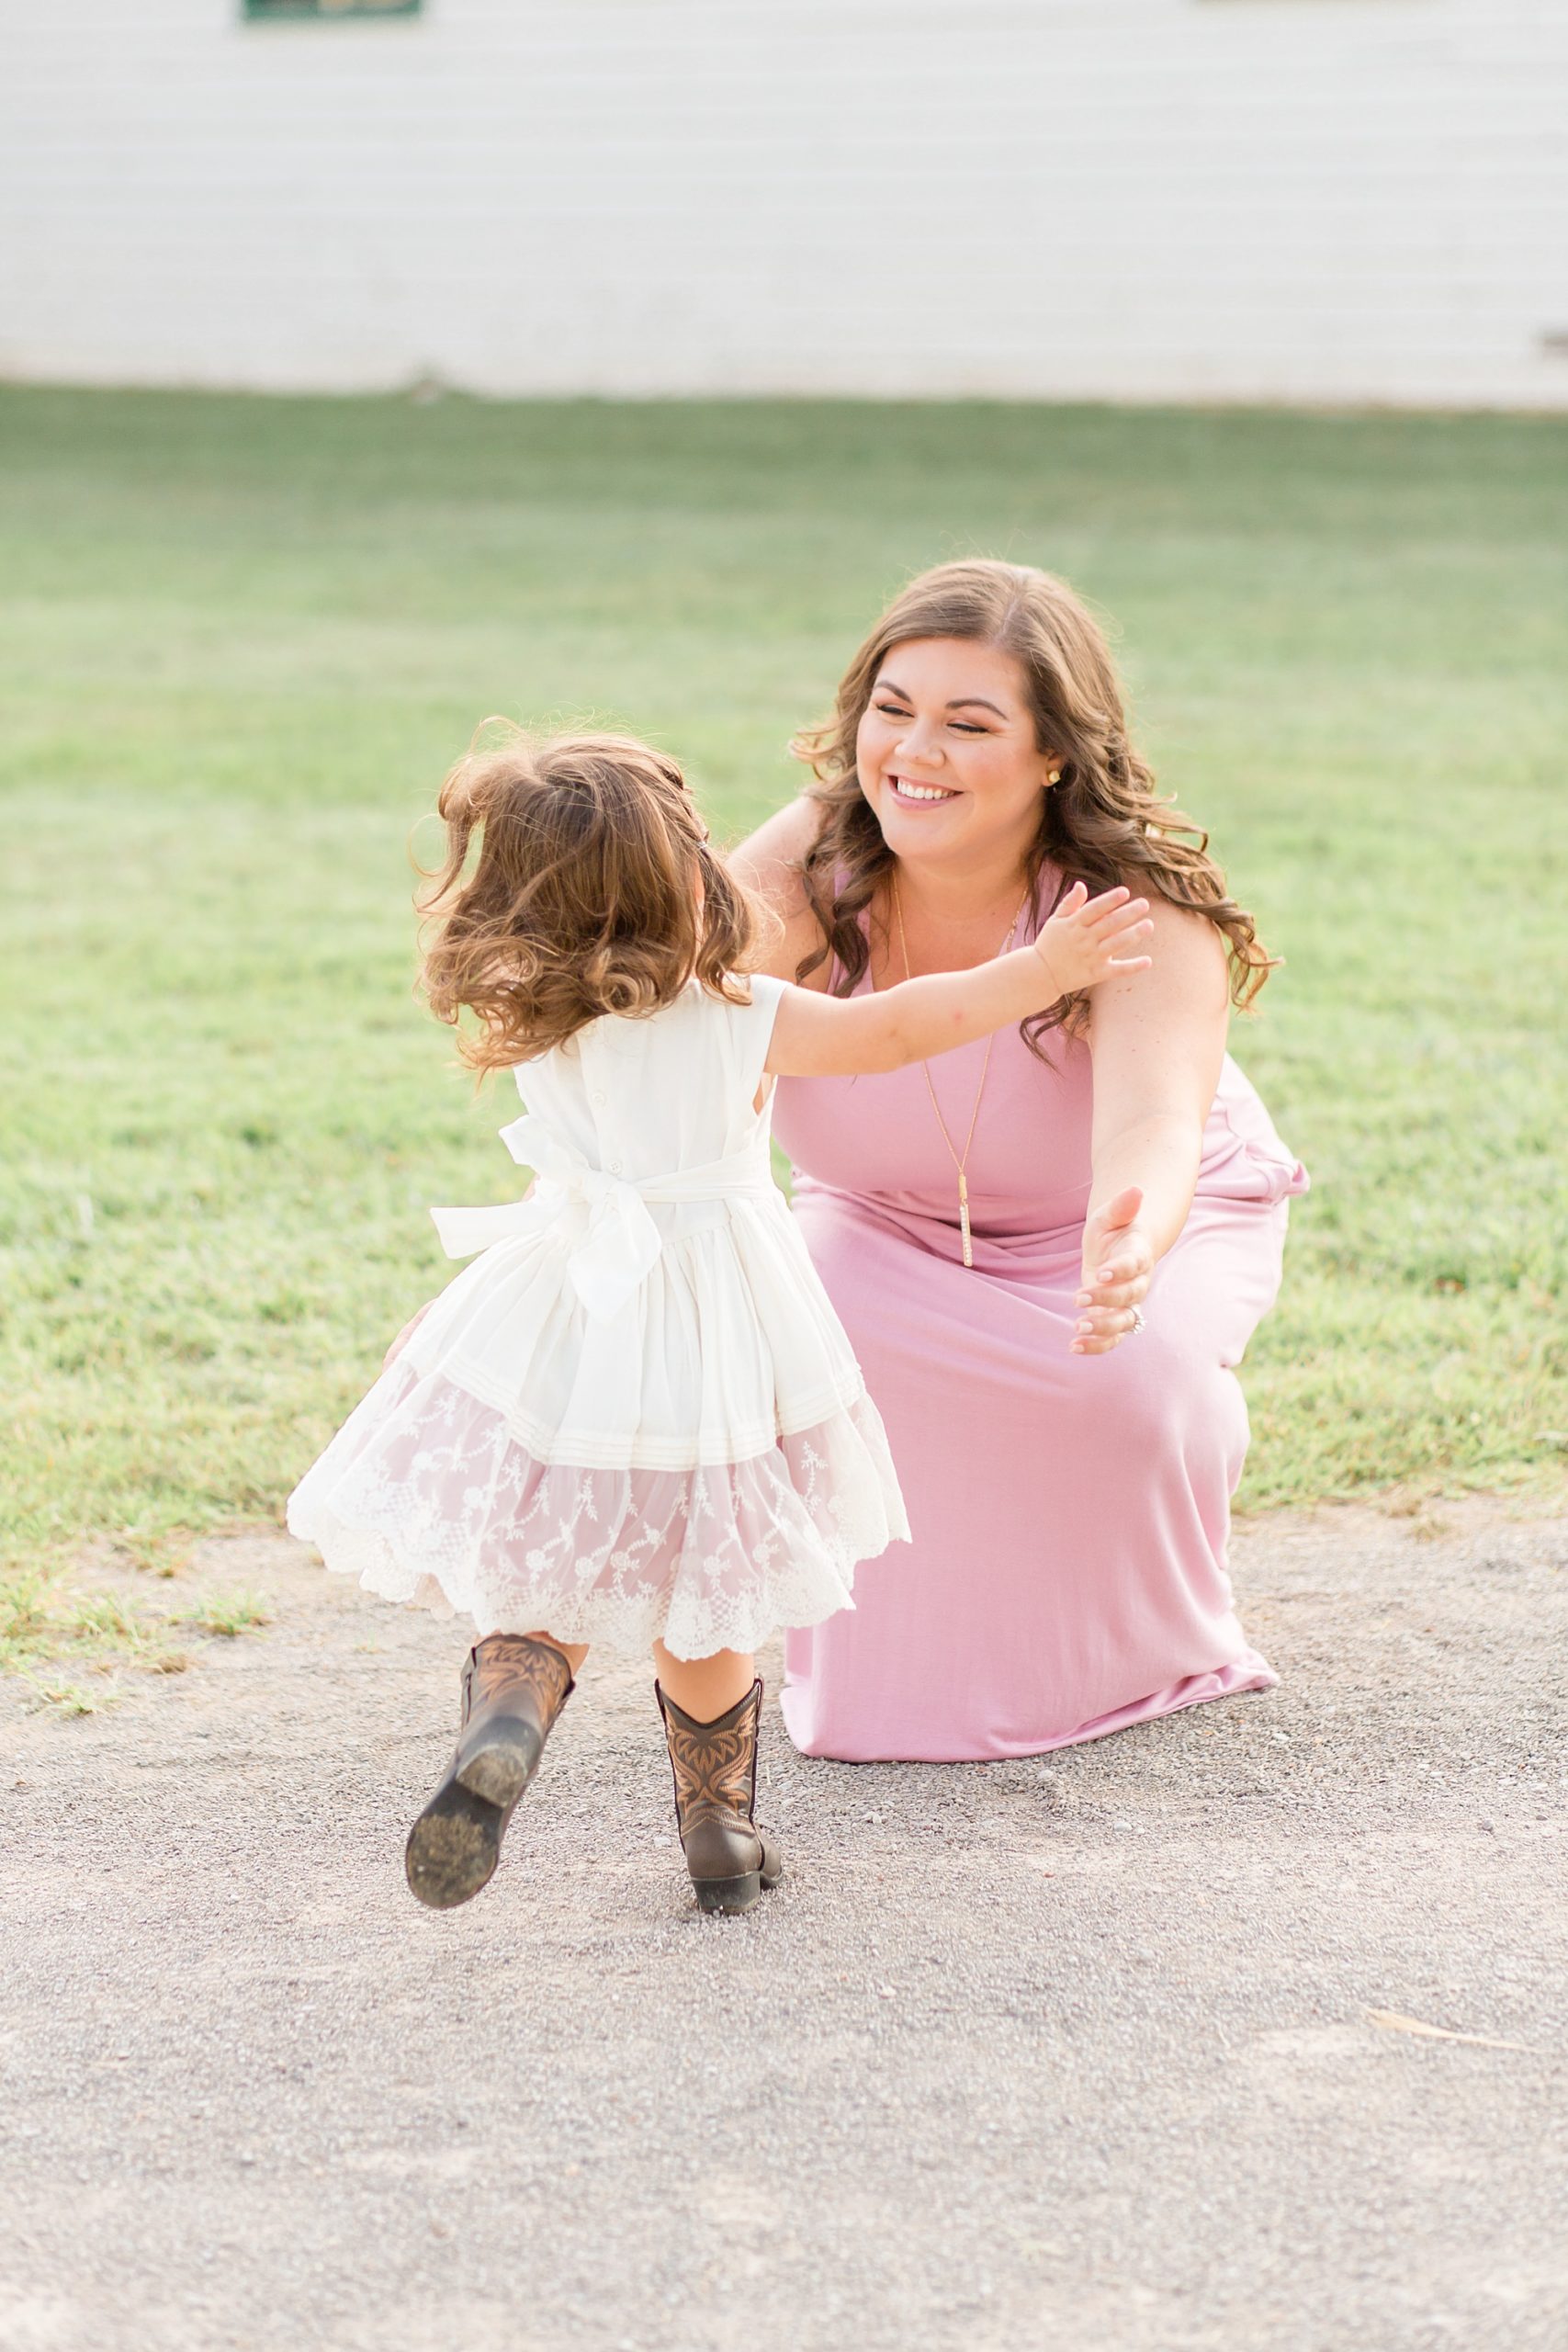 daughter runs towards mom in pastel pink gown